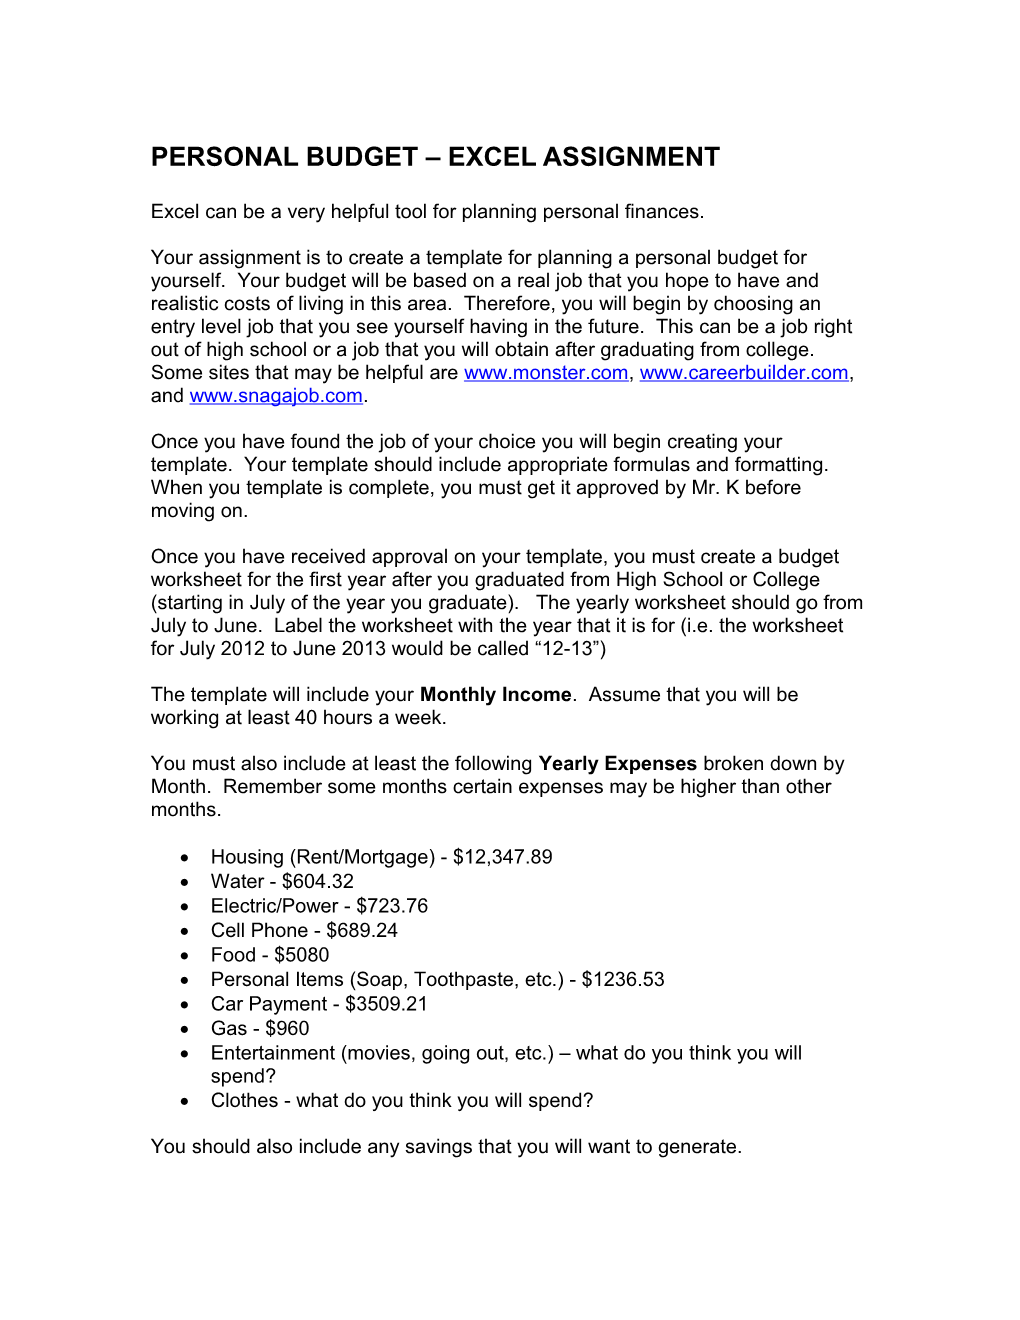 Personal Budget Excel Assignment